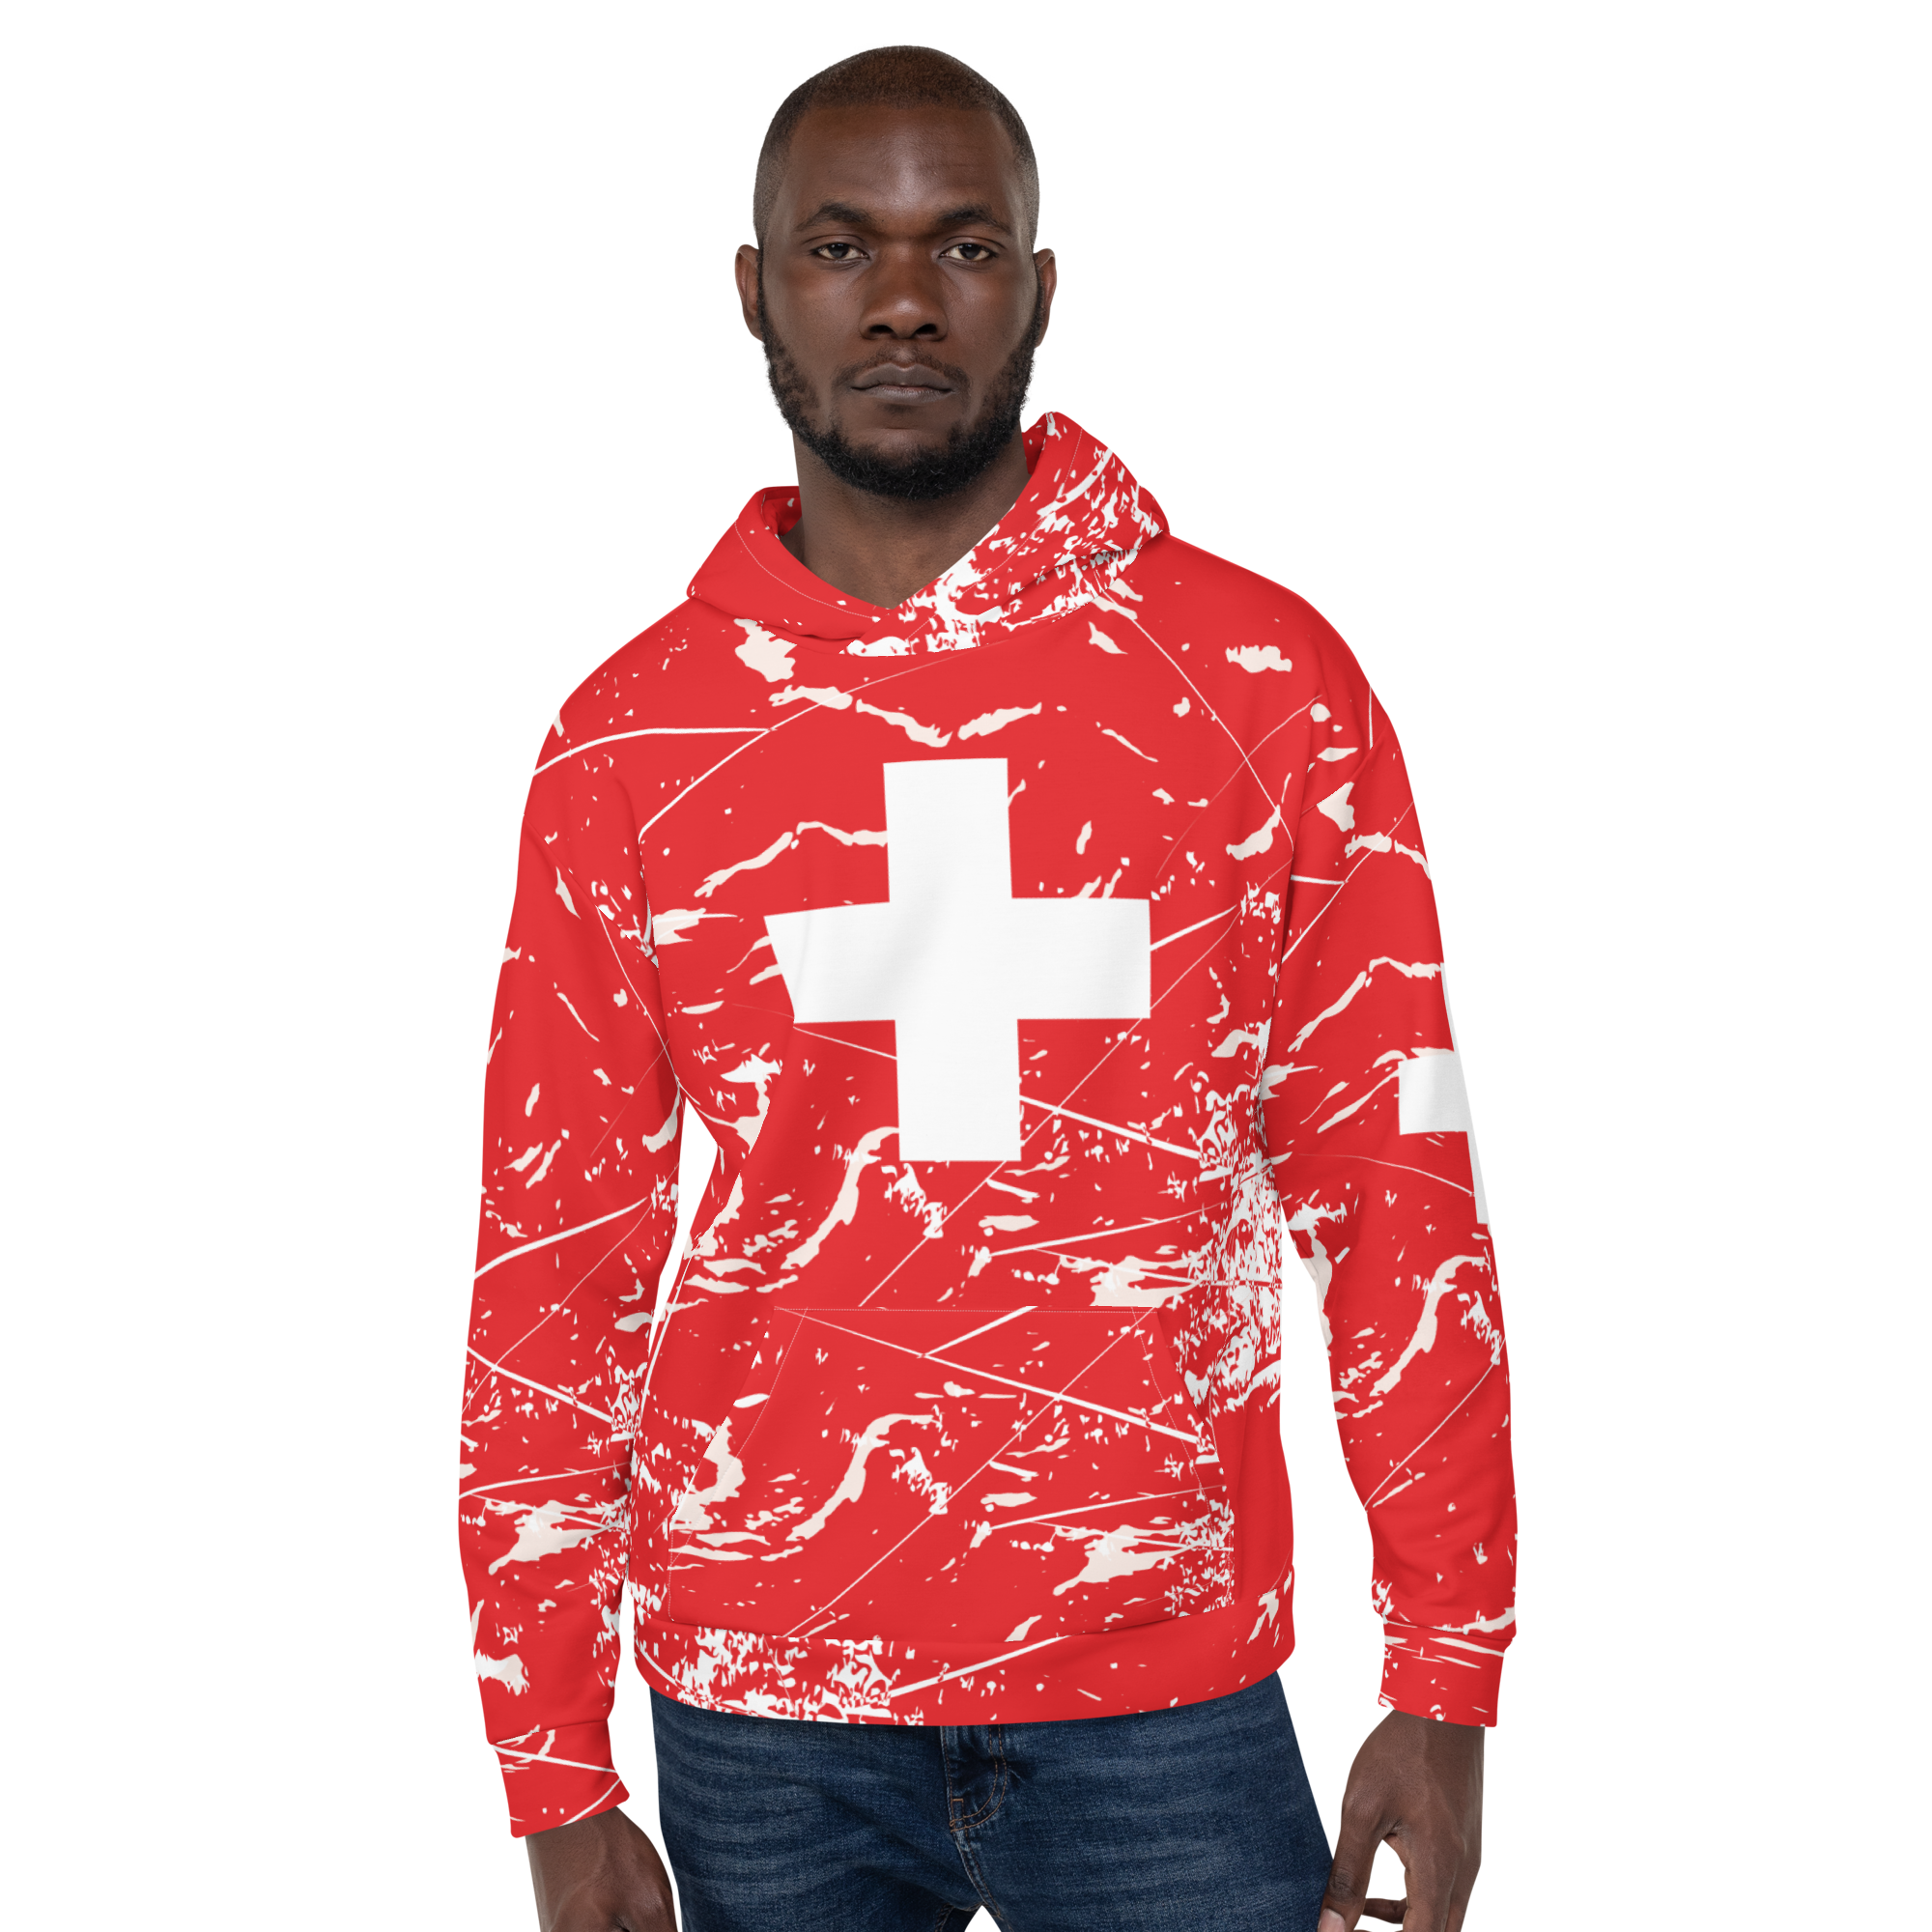 My colorful Switzerland flag inspired unisex oversized volleyball team hoodies by Volleybragswag are now sold on ETSY!